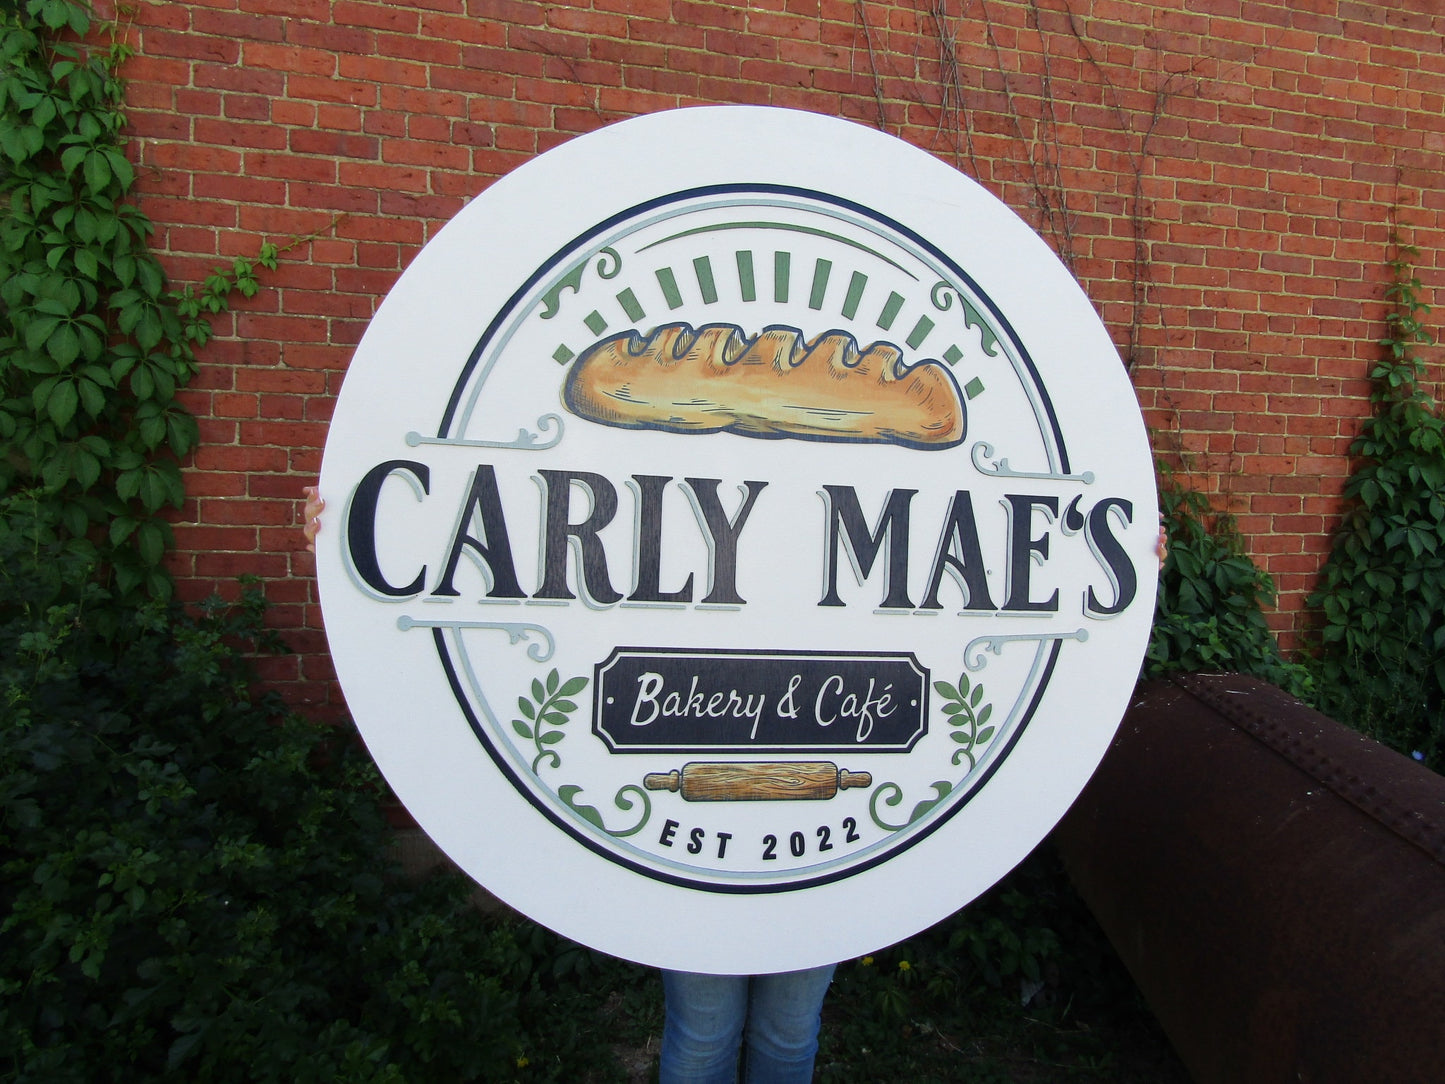 Custom Bakery & Cafe Sign Round Sign Your Logo 3D Cut letters Images Rolling Pin Kitchen Bread Dough Eatery Store Front Large Size Wood Sign